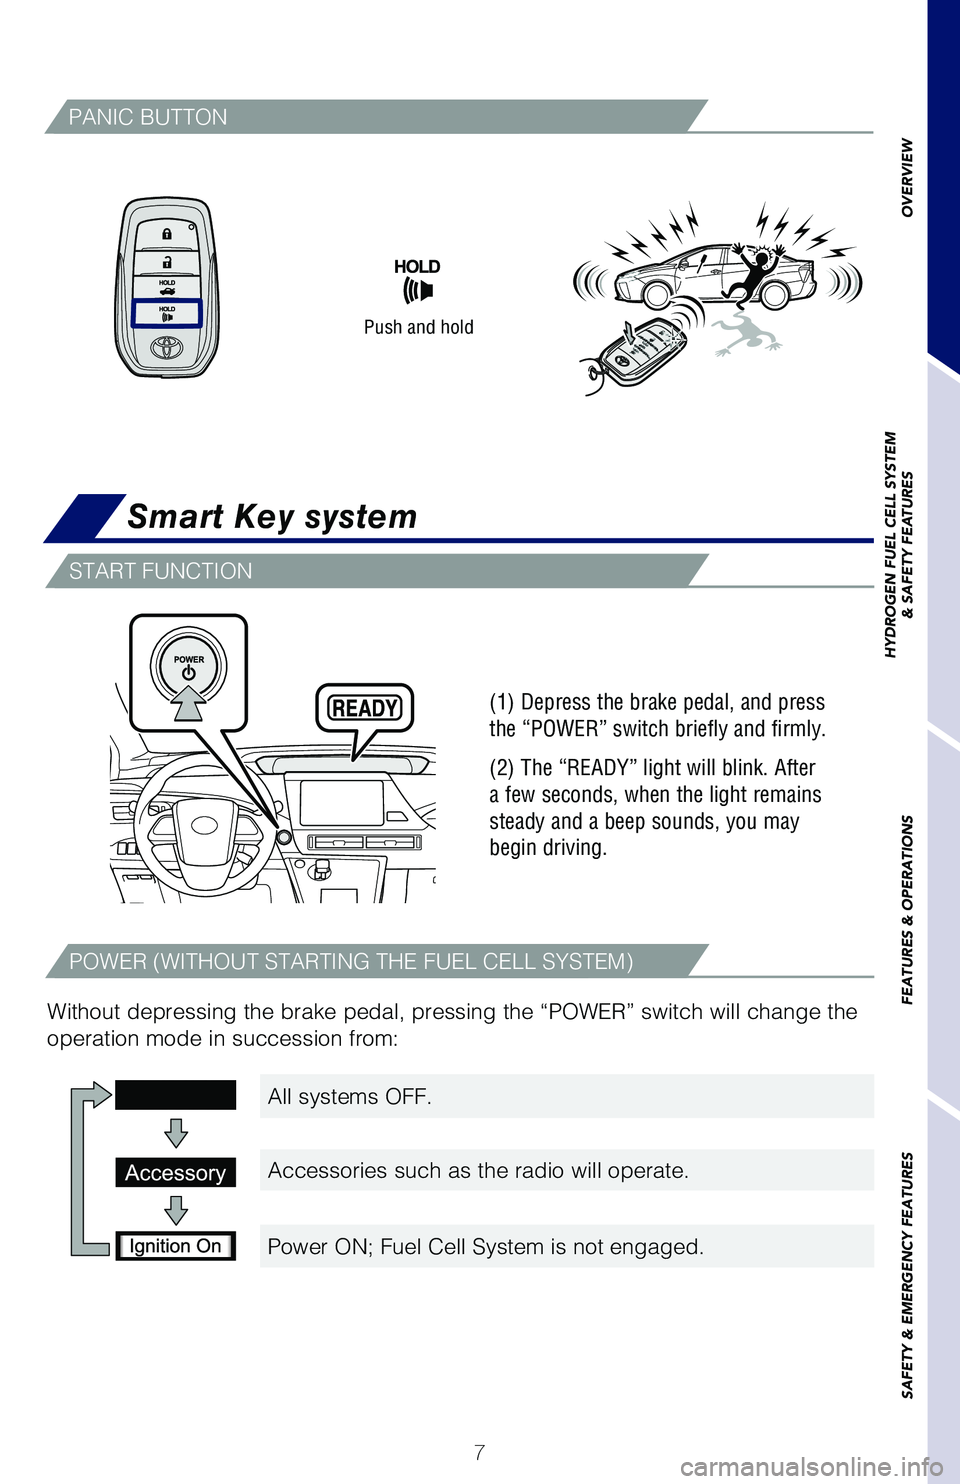 TOYOTA MIRAI 2018  Owners Manual (in English) 7
OVERVIEW
HYDROGEN FUEL CELL SYSTEM
& SAFETY FEATURES
FEATURES & OPERATIONS
SAFETY & EMERGENCY FEATURES
Smart Key system
Push and hold
Without depressing the brake pedal, pressing the “POWER” swi